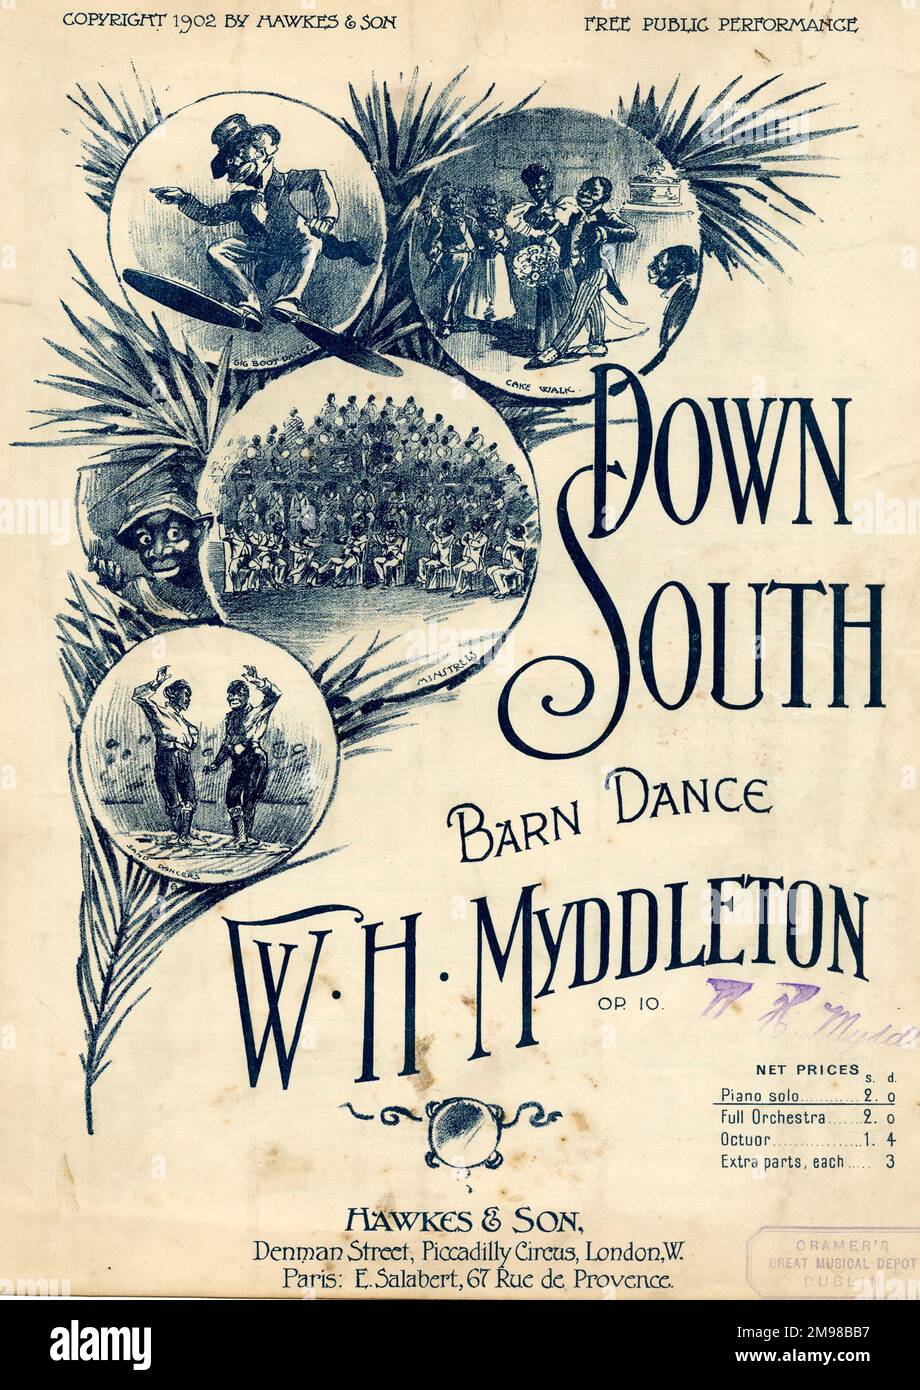 Music cover, Down South Barn Dance, by W H Myddleton - Big Boot Dance, Cake Walk, Minstrels, Sand Dancers. Stock Photo